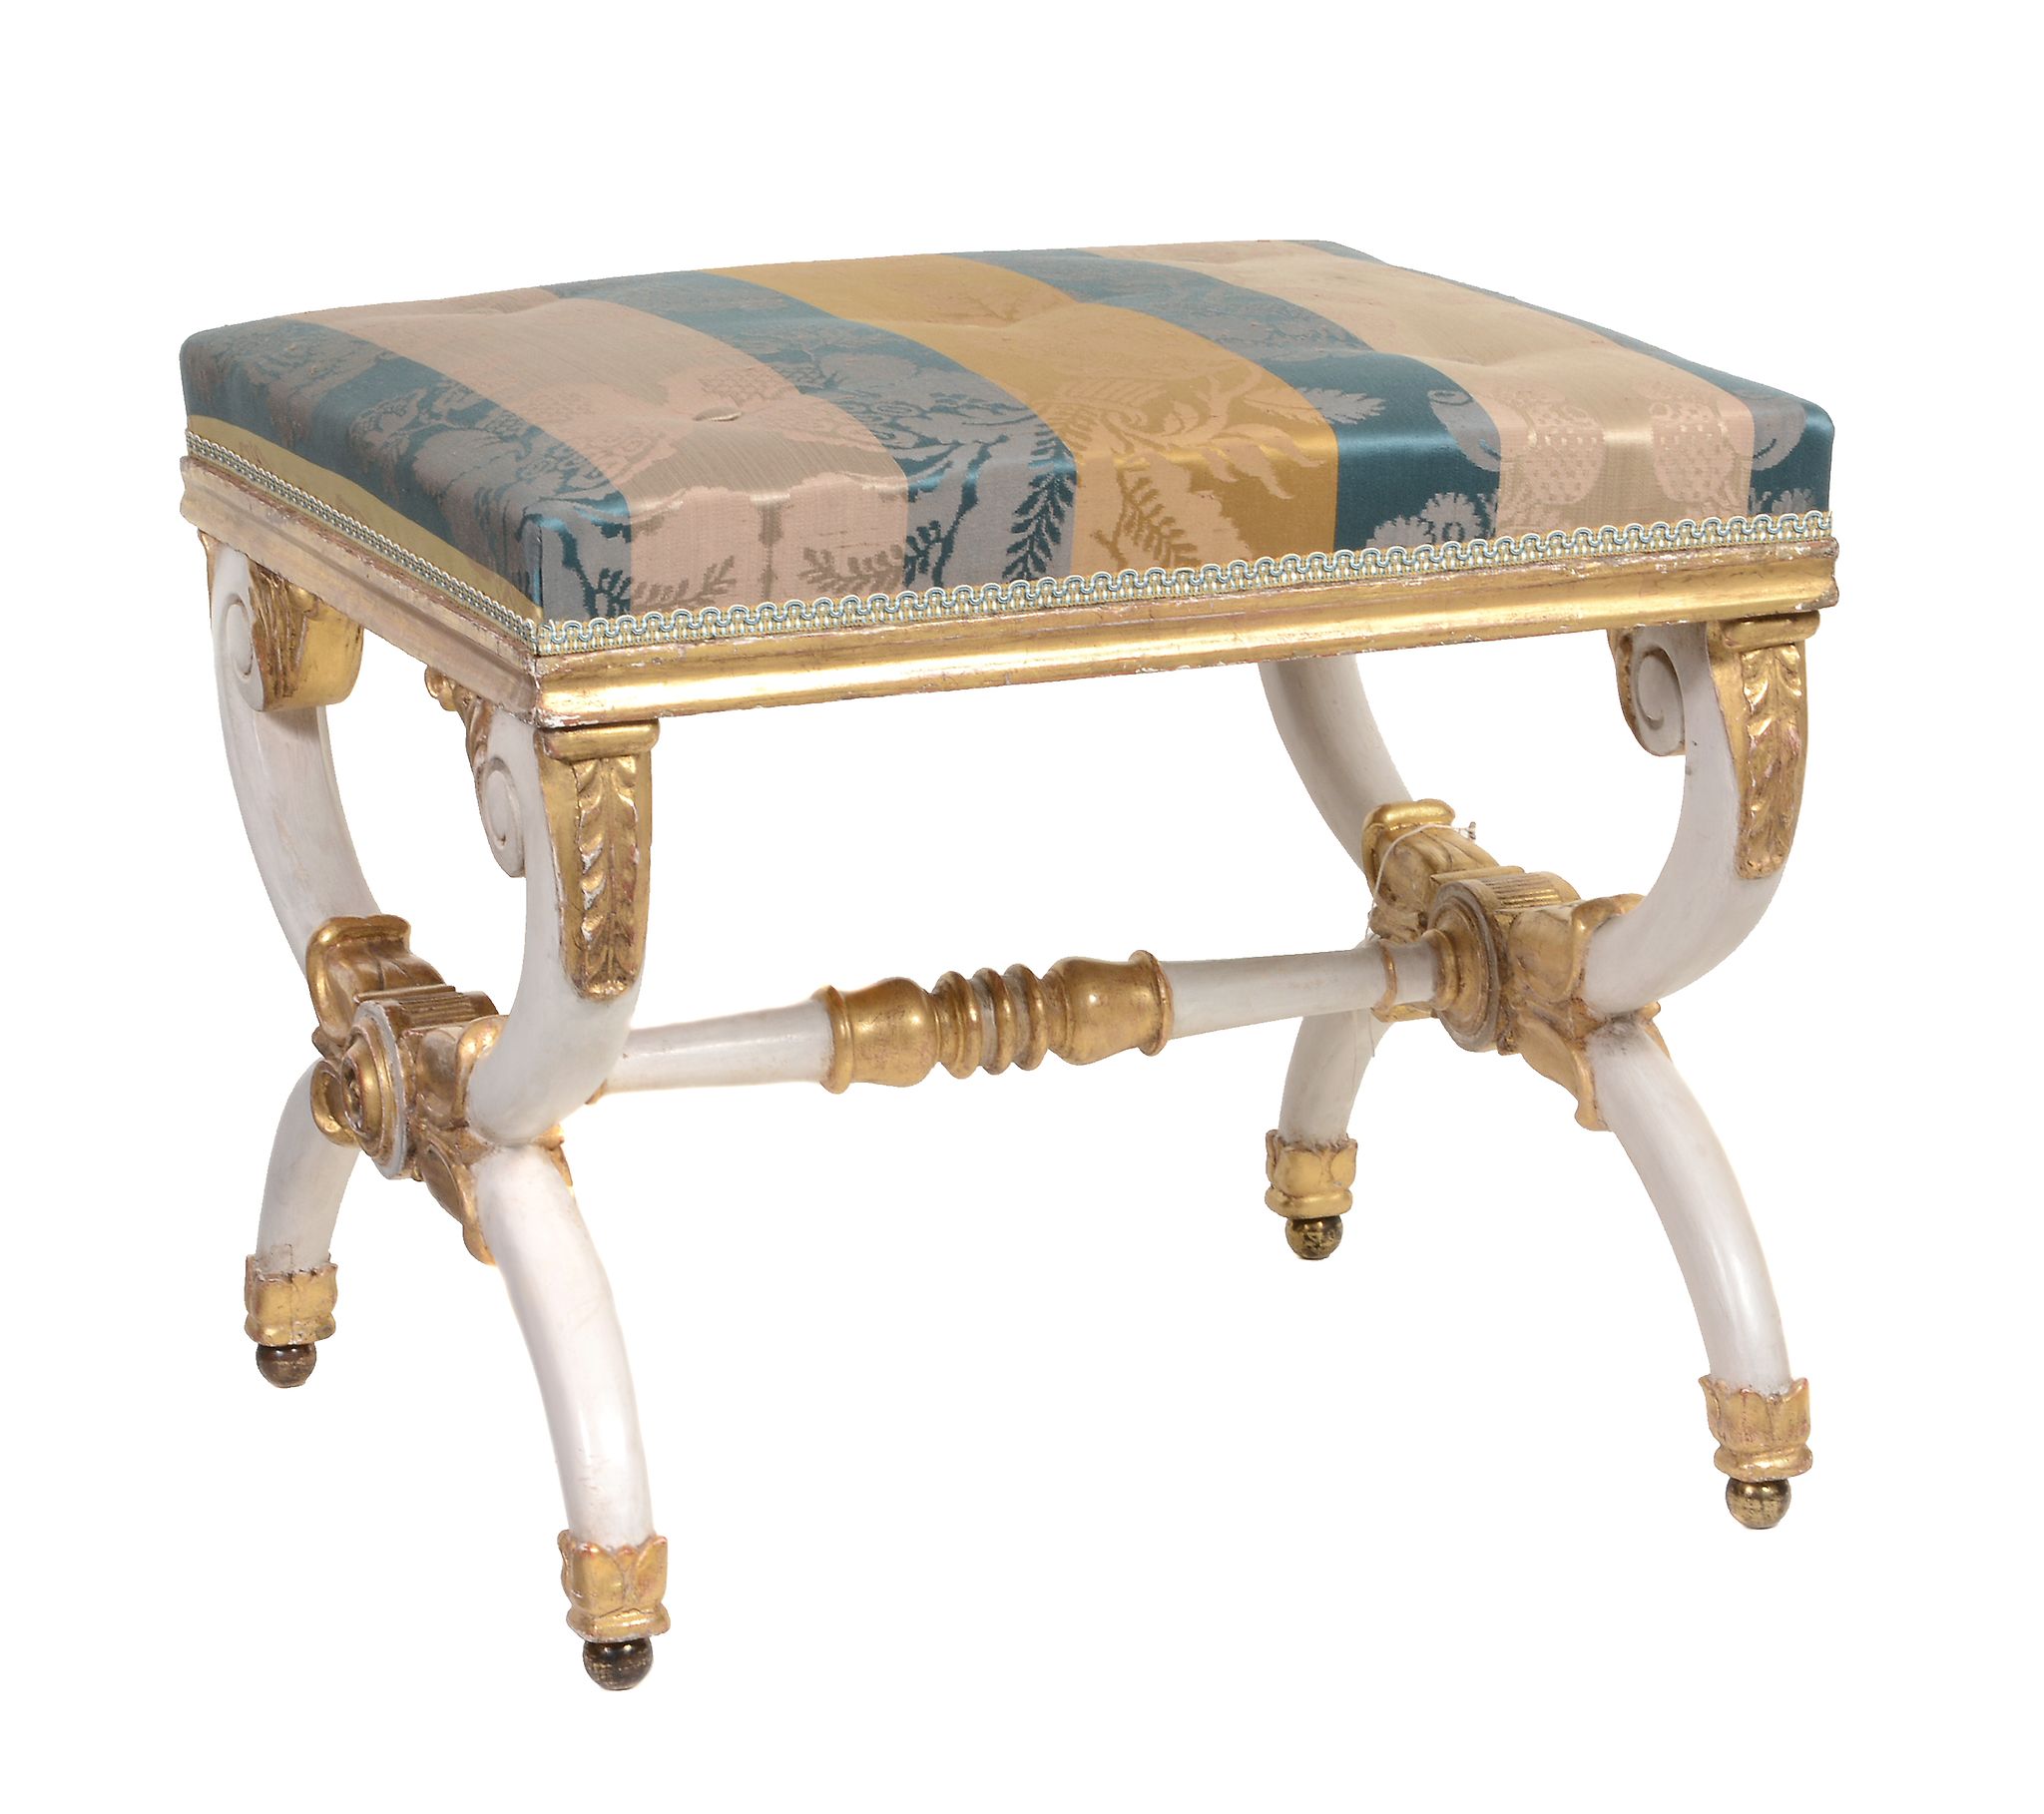 A Regency cream painted and parcel gilt x-frame stool, circa 1815  A Regency cream painted and